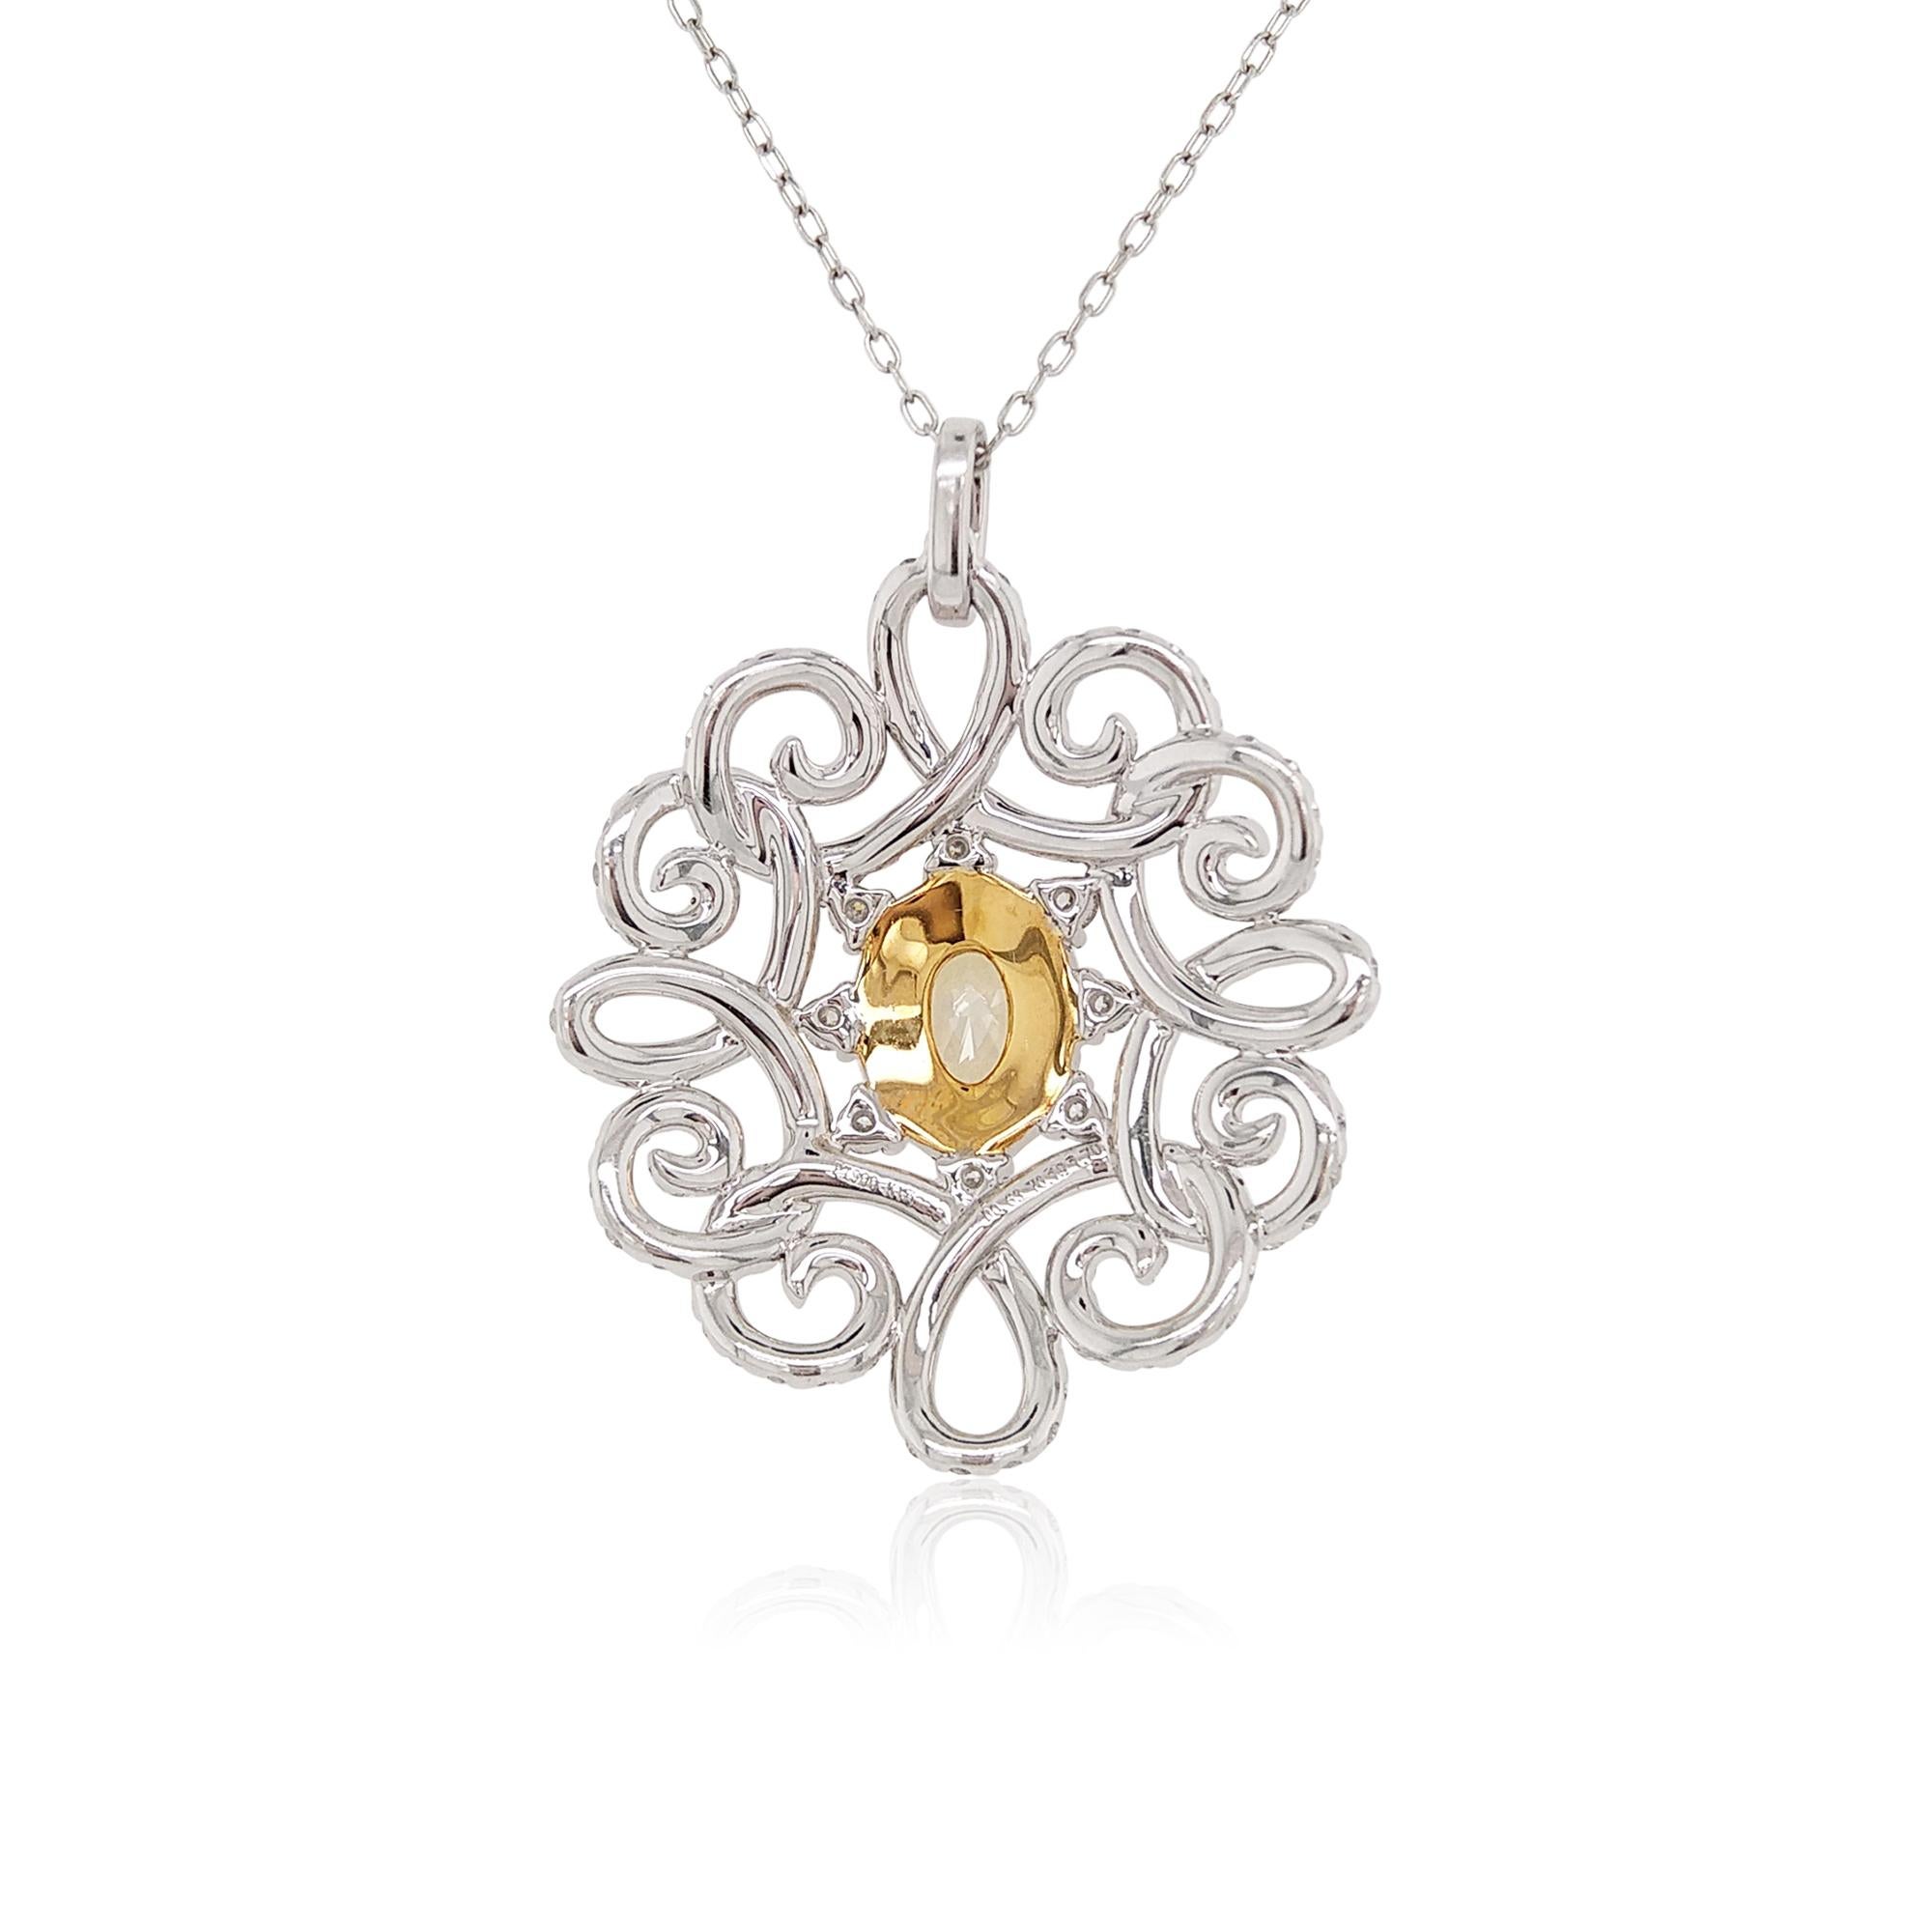 This bold pendant features a GIA certified Fancy Yellow diamond in its centre, within a halo of brilliant small Yellow diamonds, and intricate sparkling White diamonds twists. This delightful necklace will add a sumptuous pop of colour to any outfit